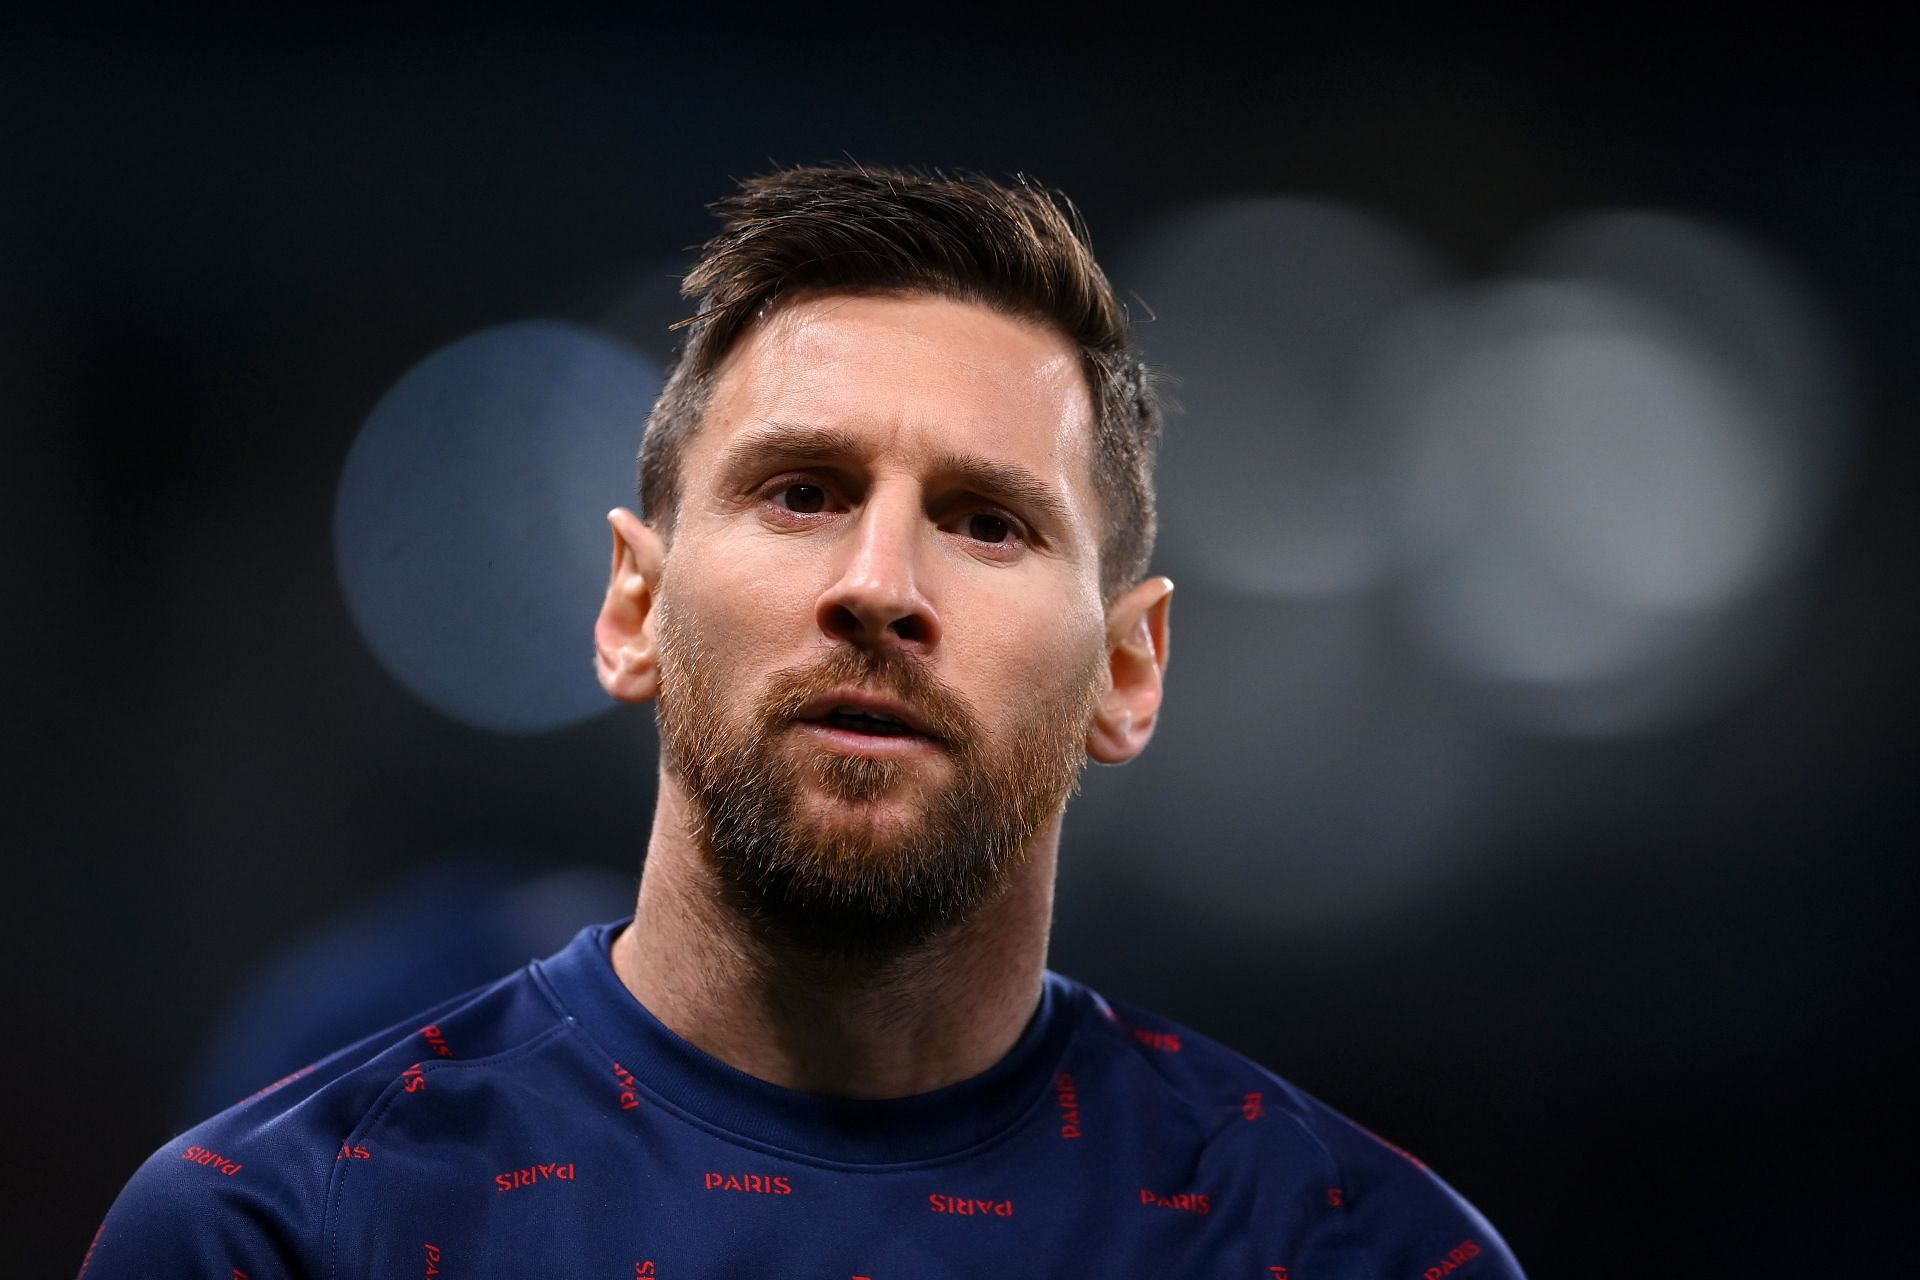 Messi has not yet hit his best at PSG